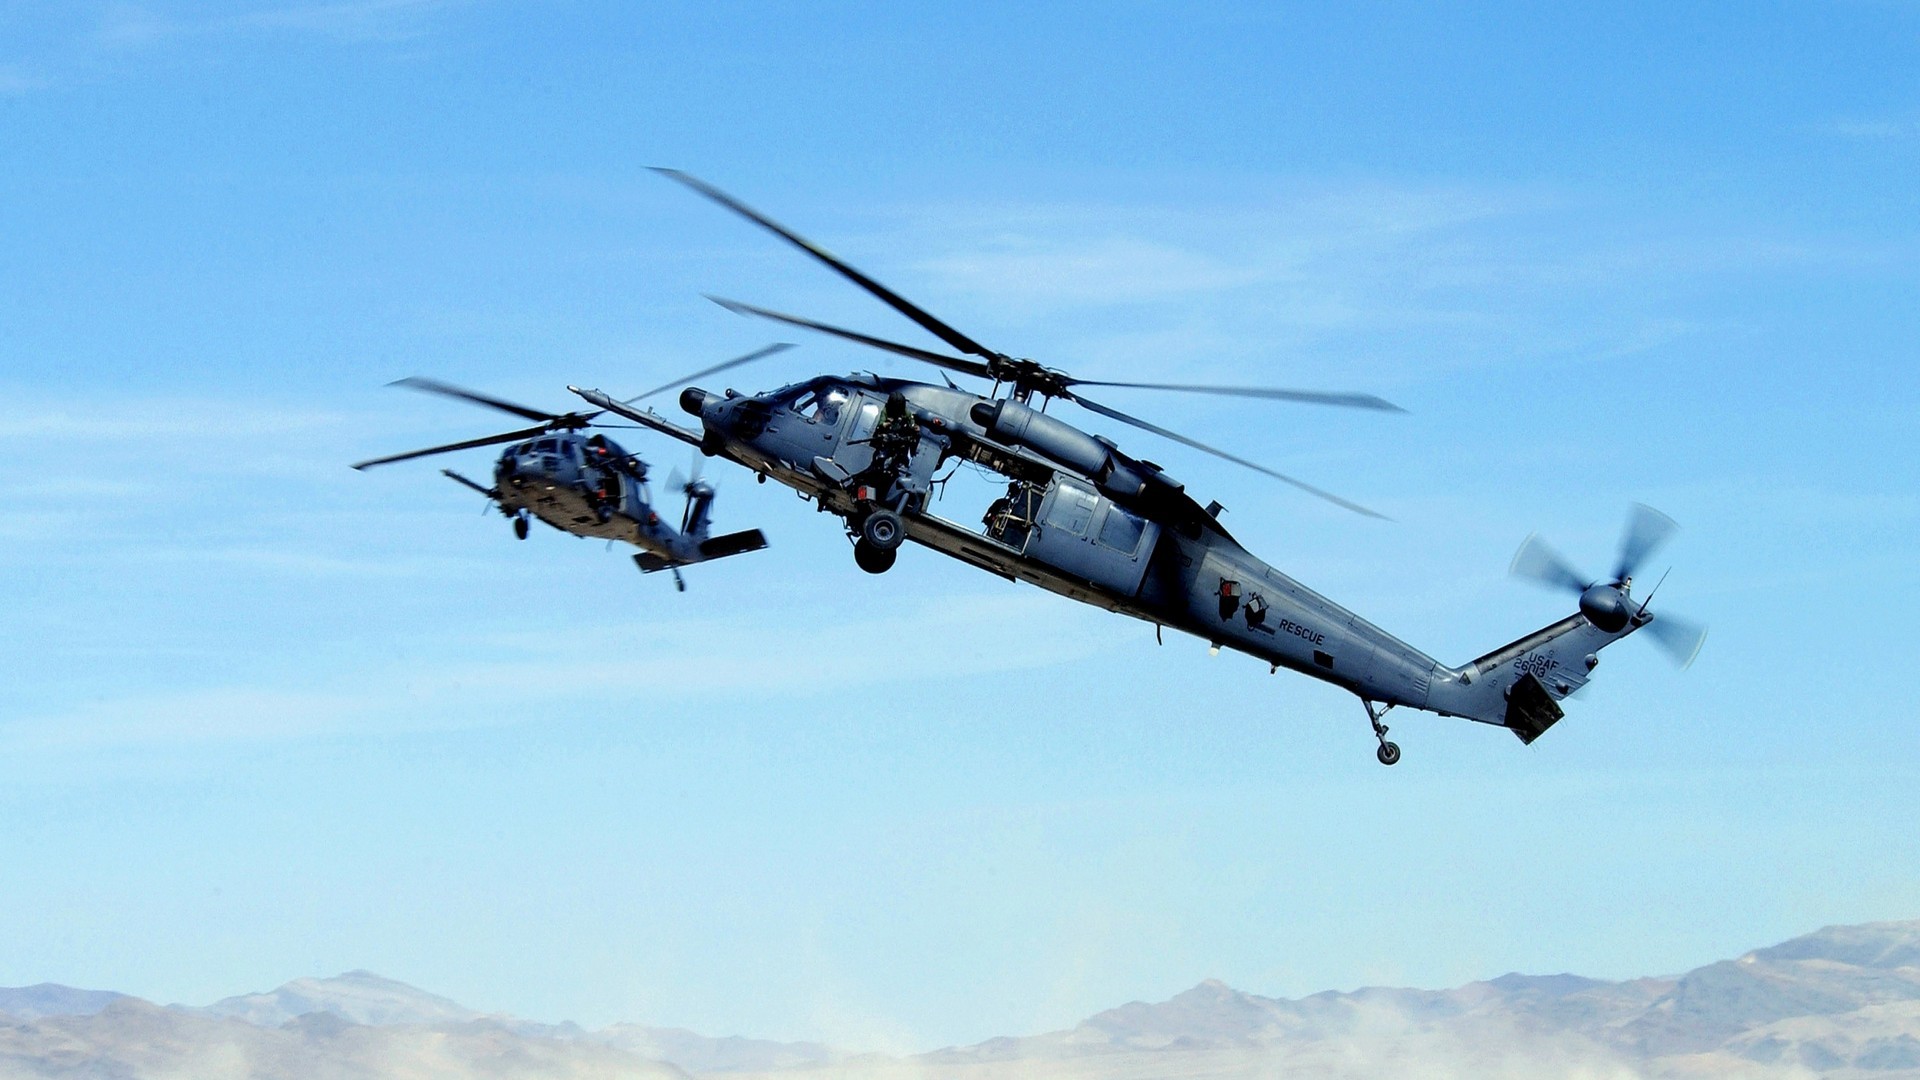 aircraft_military_helicopters_vehicles_uh60_black_hawk_skyscapes_3143x2048_wallpaper_Wallpaper_2560x1600_www.wall321.com_cr.jpg